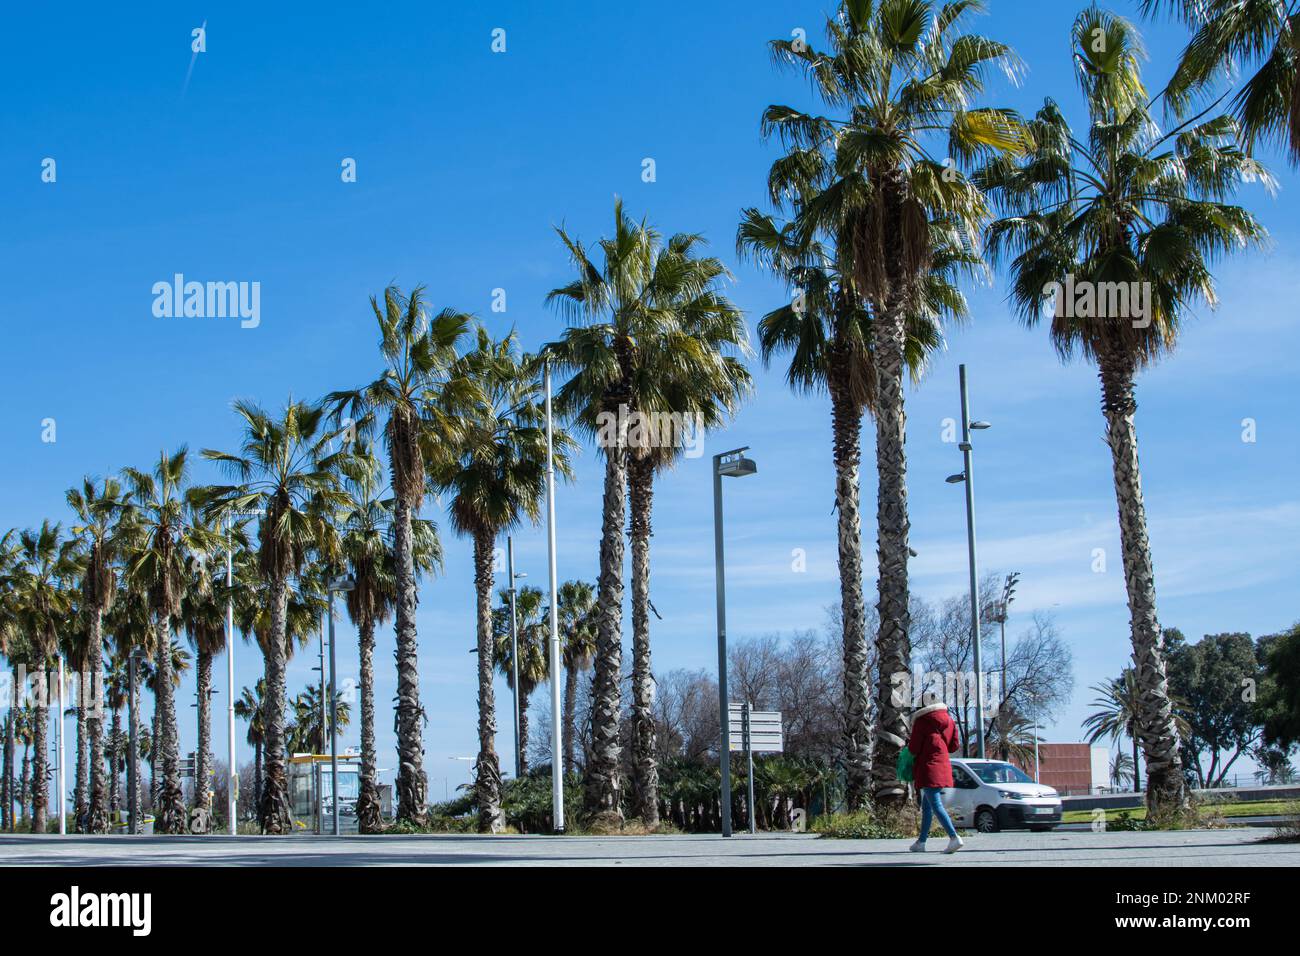 A woman wore a red coat walks near palm trees Stock Photo